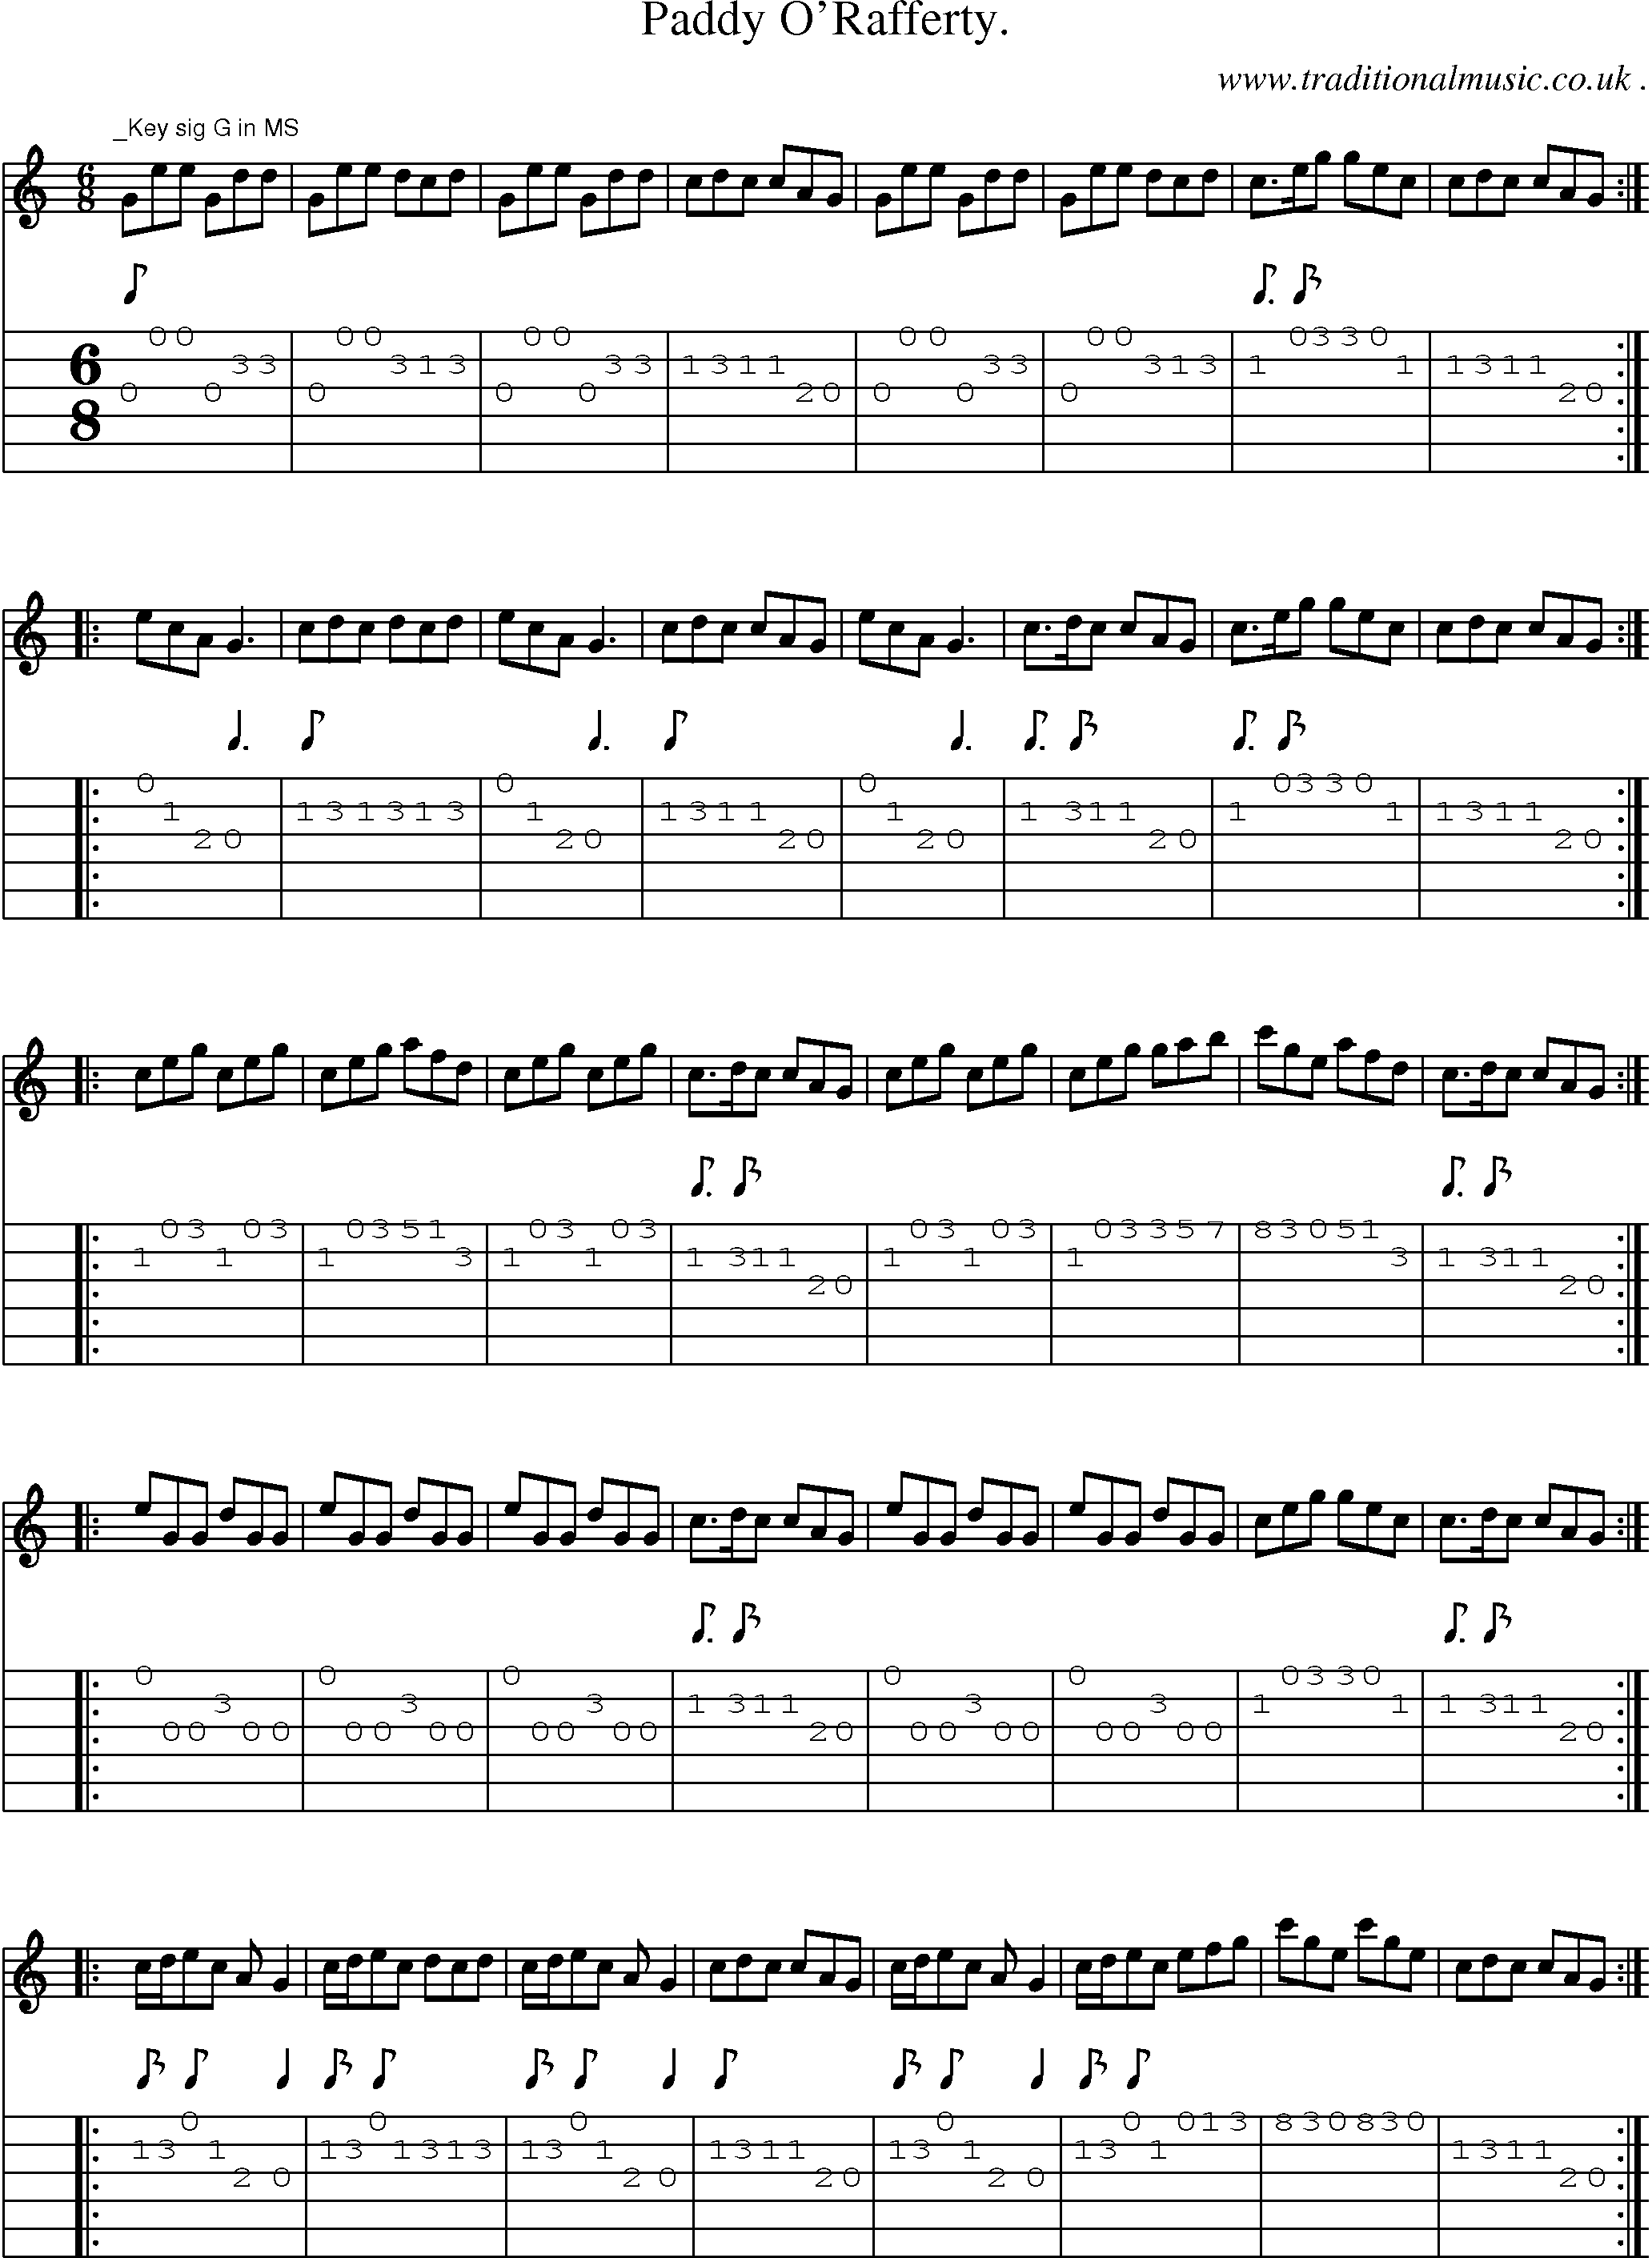 Sheet-Music and Guitar Tabs for Paddy ORafferty 